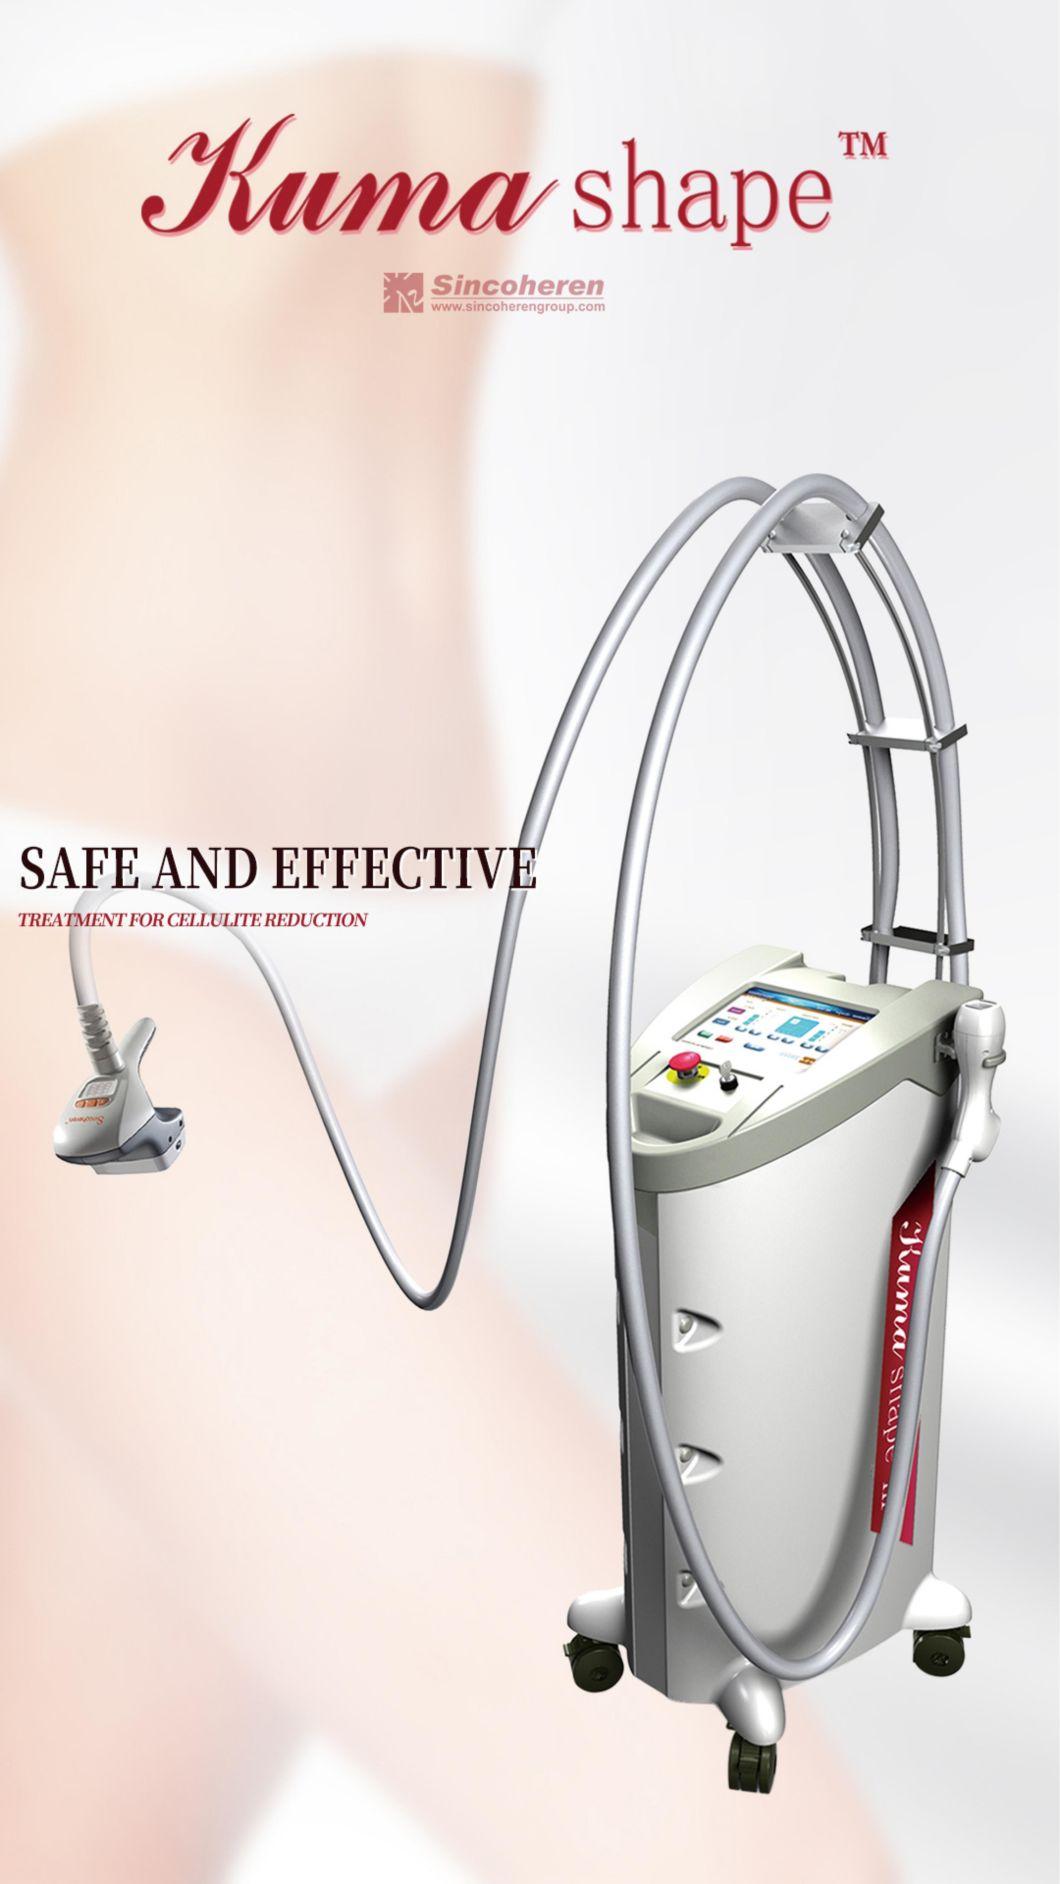 15 Years Best Selling Infrared Vacuum Auto Roller Massage Body Contouring Weight Loss Fat Burning Body Shaper Slimming Machine with CE Certification-Xsw